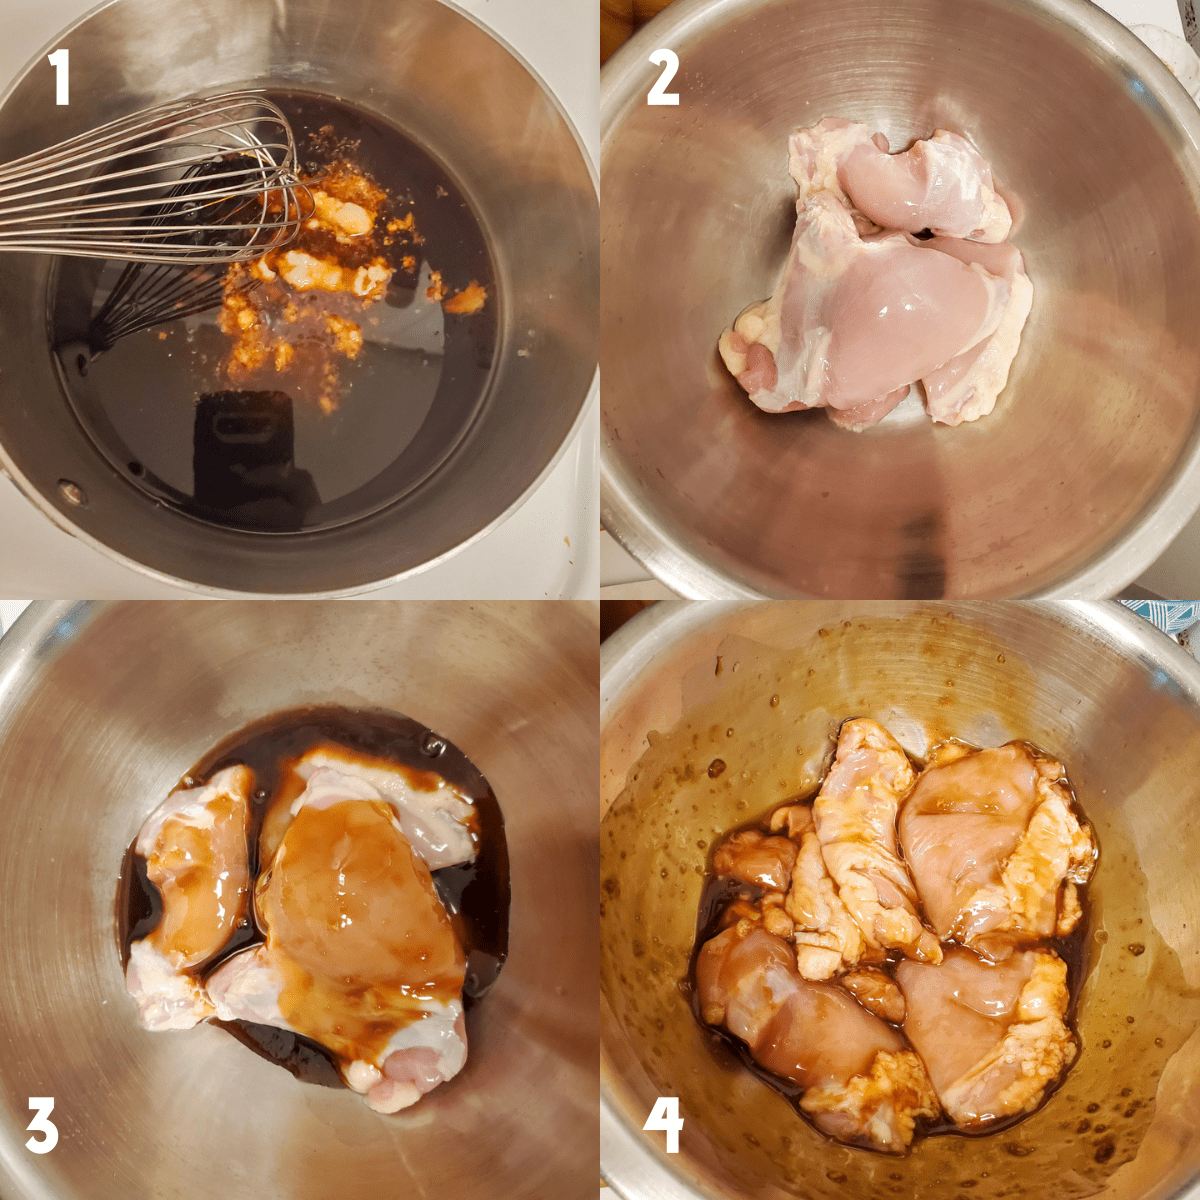 Process photos in a 2x2 collage; 1) Teriyaki sauce ingredients poured into a medium sauce pan and being whisked together. 2) Raw chicken thighs in a mixing bowl 3) Teriyaki sauce poured over chicken thighs in a mixing bowl. 4) Chicken thighs tossed in teriyaki sauce in a mixing bowl. 